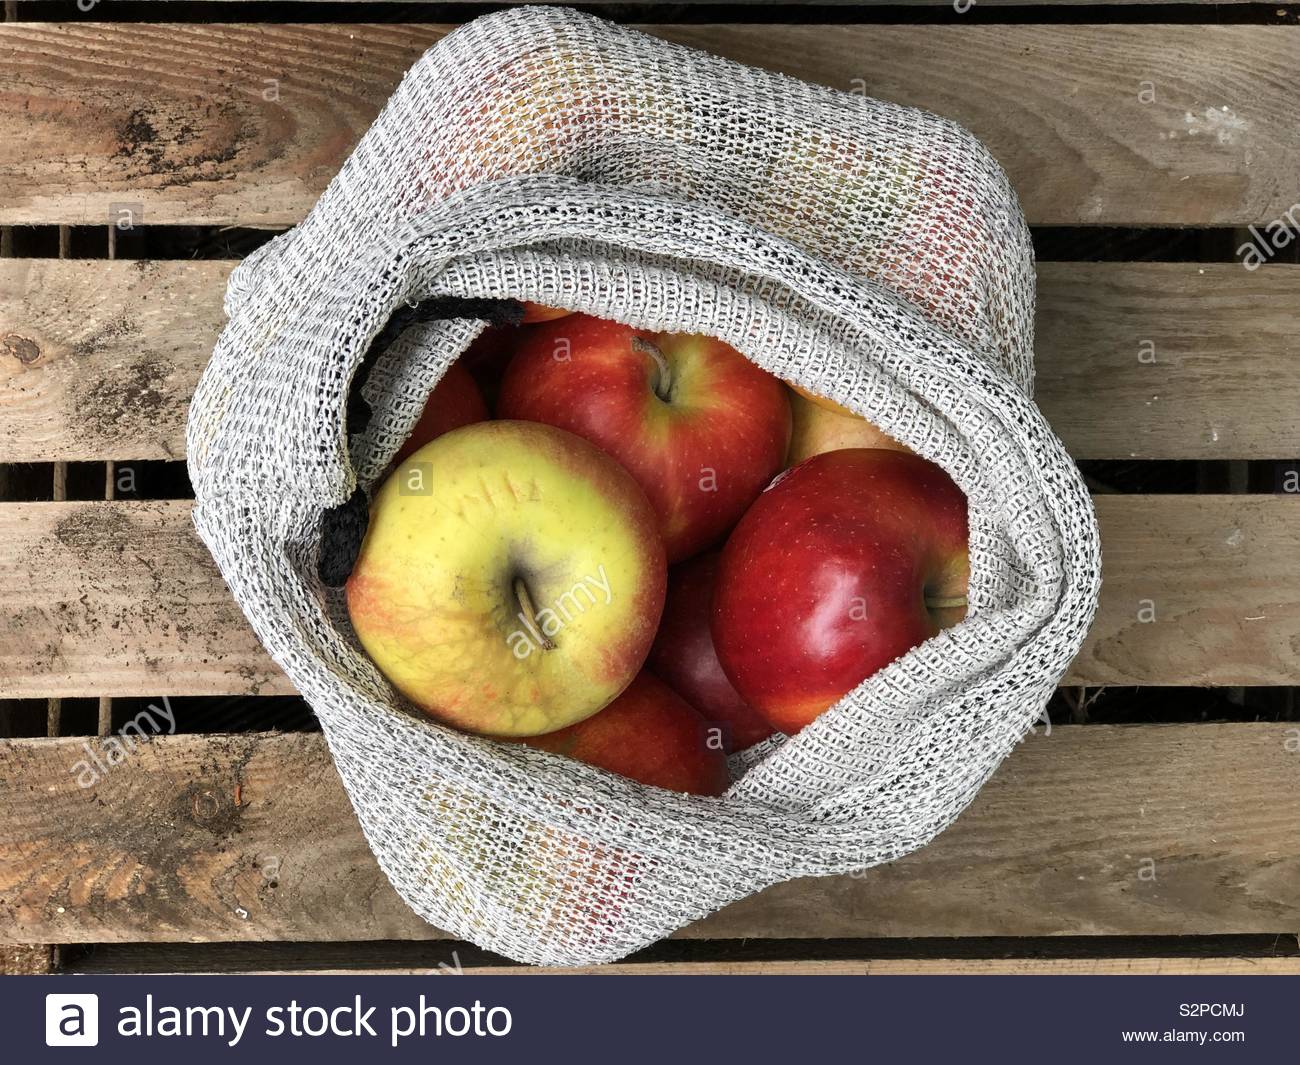 Red apples in a reusable bag Stock Photo